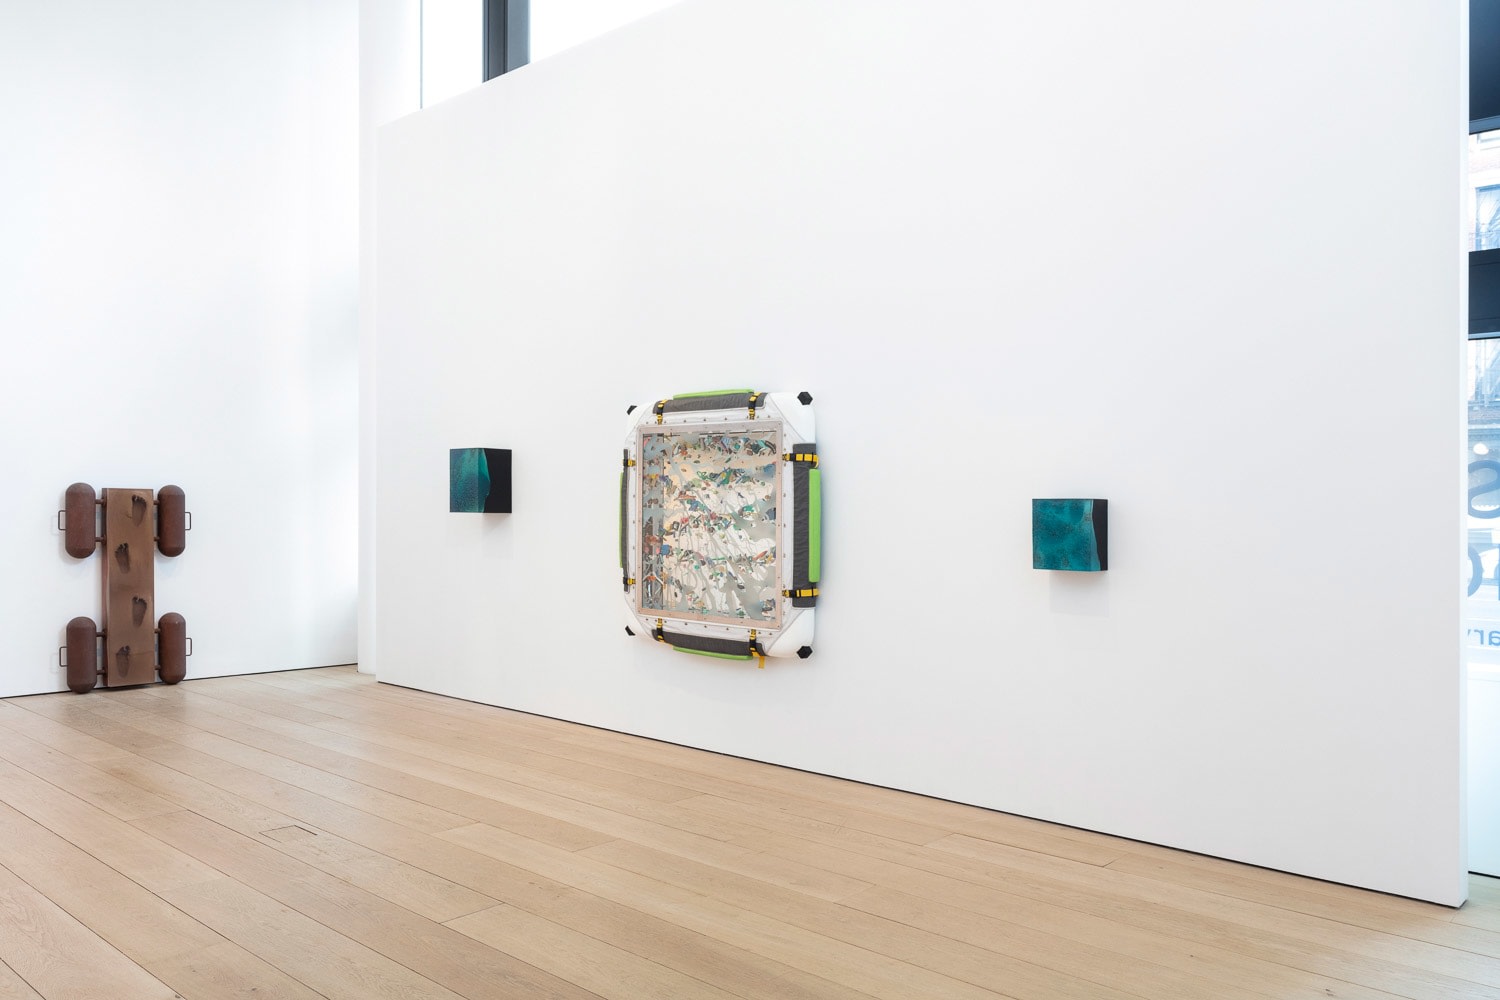 Ashley Bickerton: Seascapes at the End of History, Installation view, New York